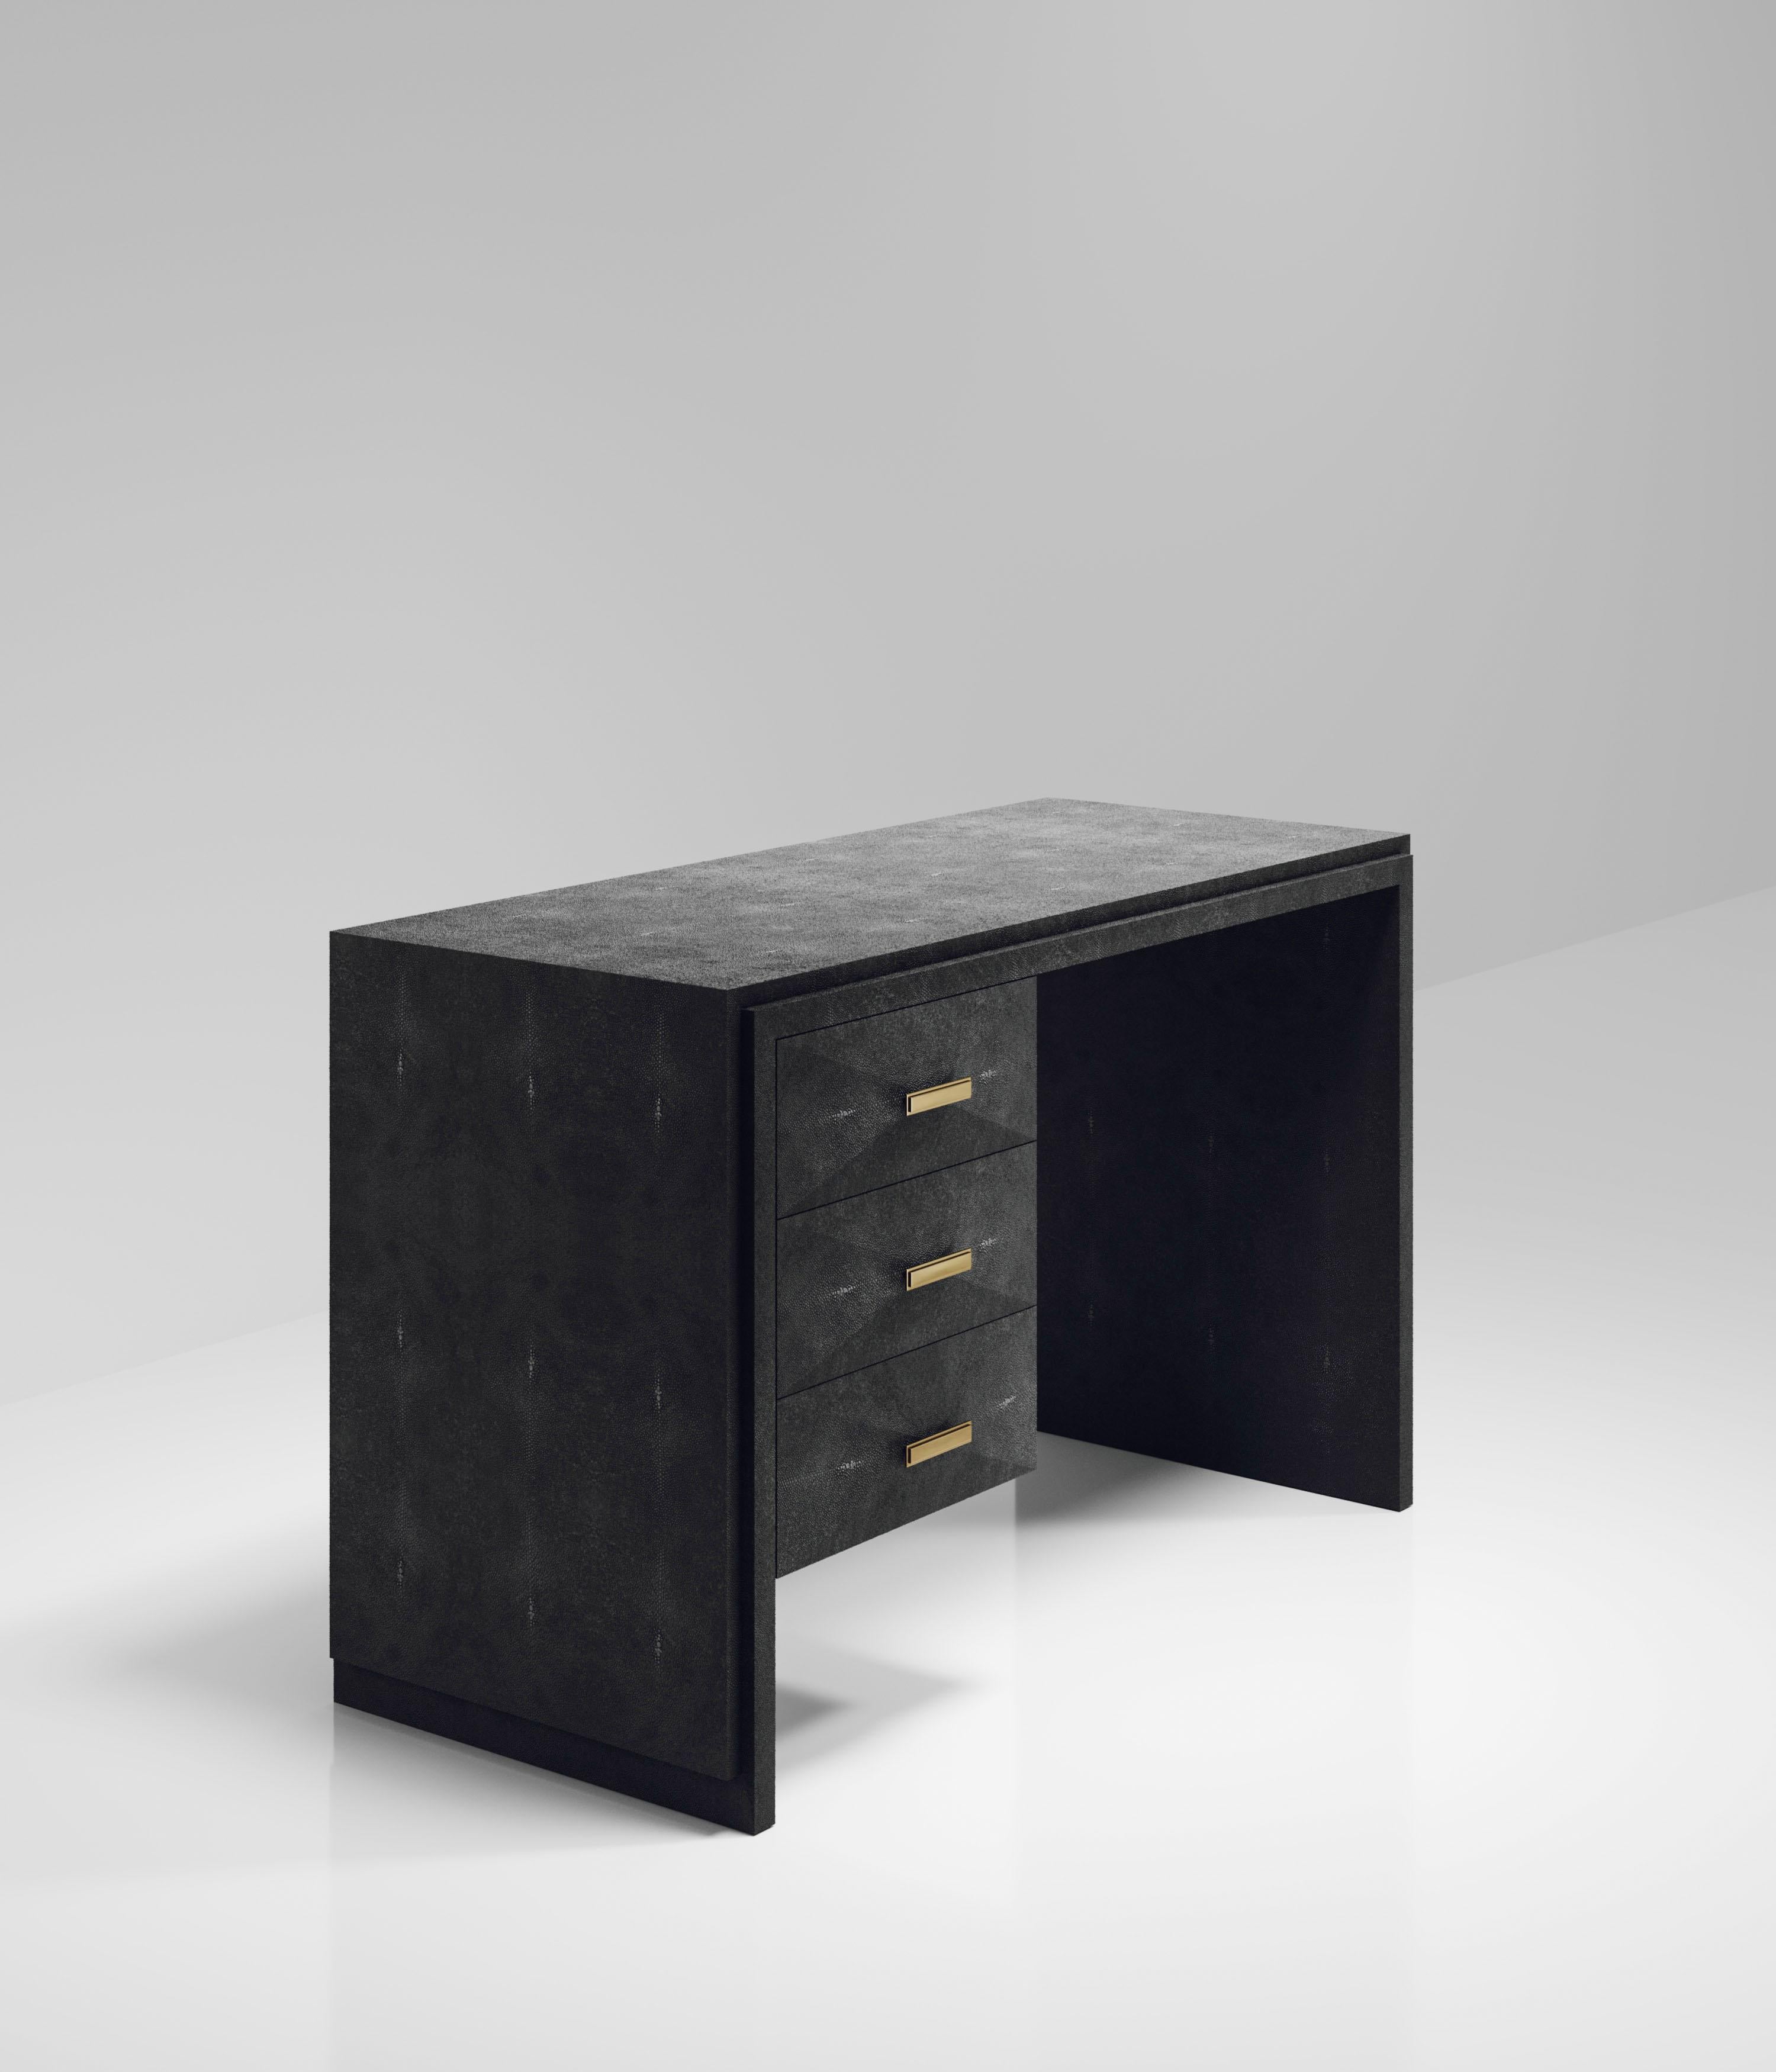 The Iconic Writing Desk is both elegant and minimalist with its classic aesthetic that showcases the purity of the beautiful Augousti craftsmanship. This piece is completely inlaid in black shagreen and includes 3 bevelled drawers on the left side